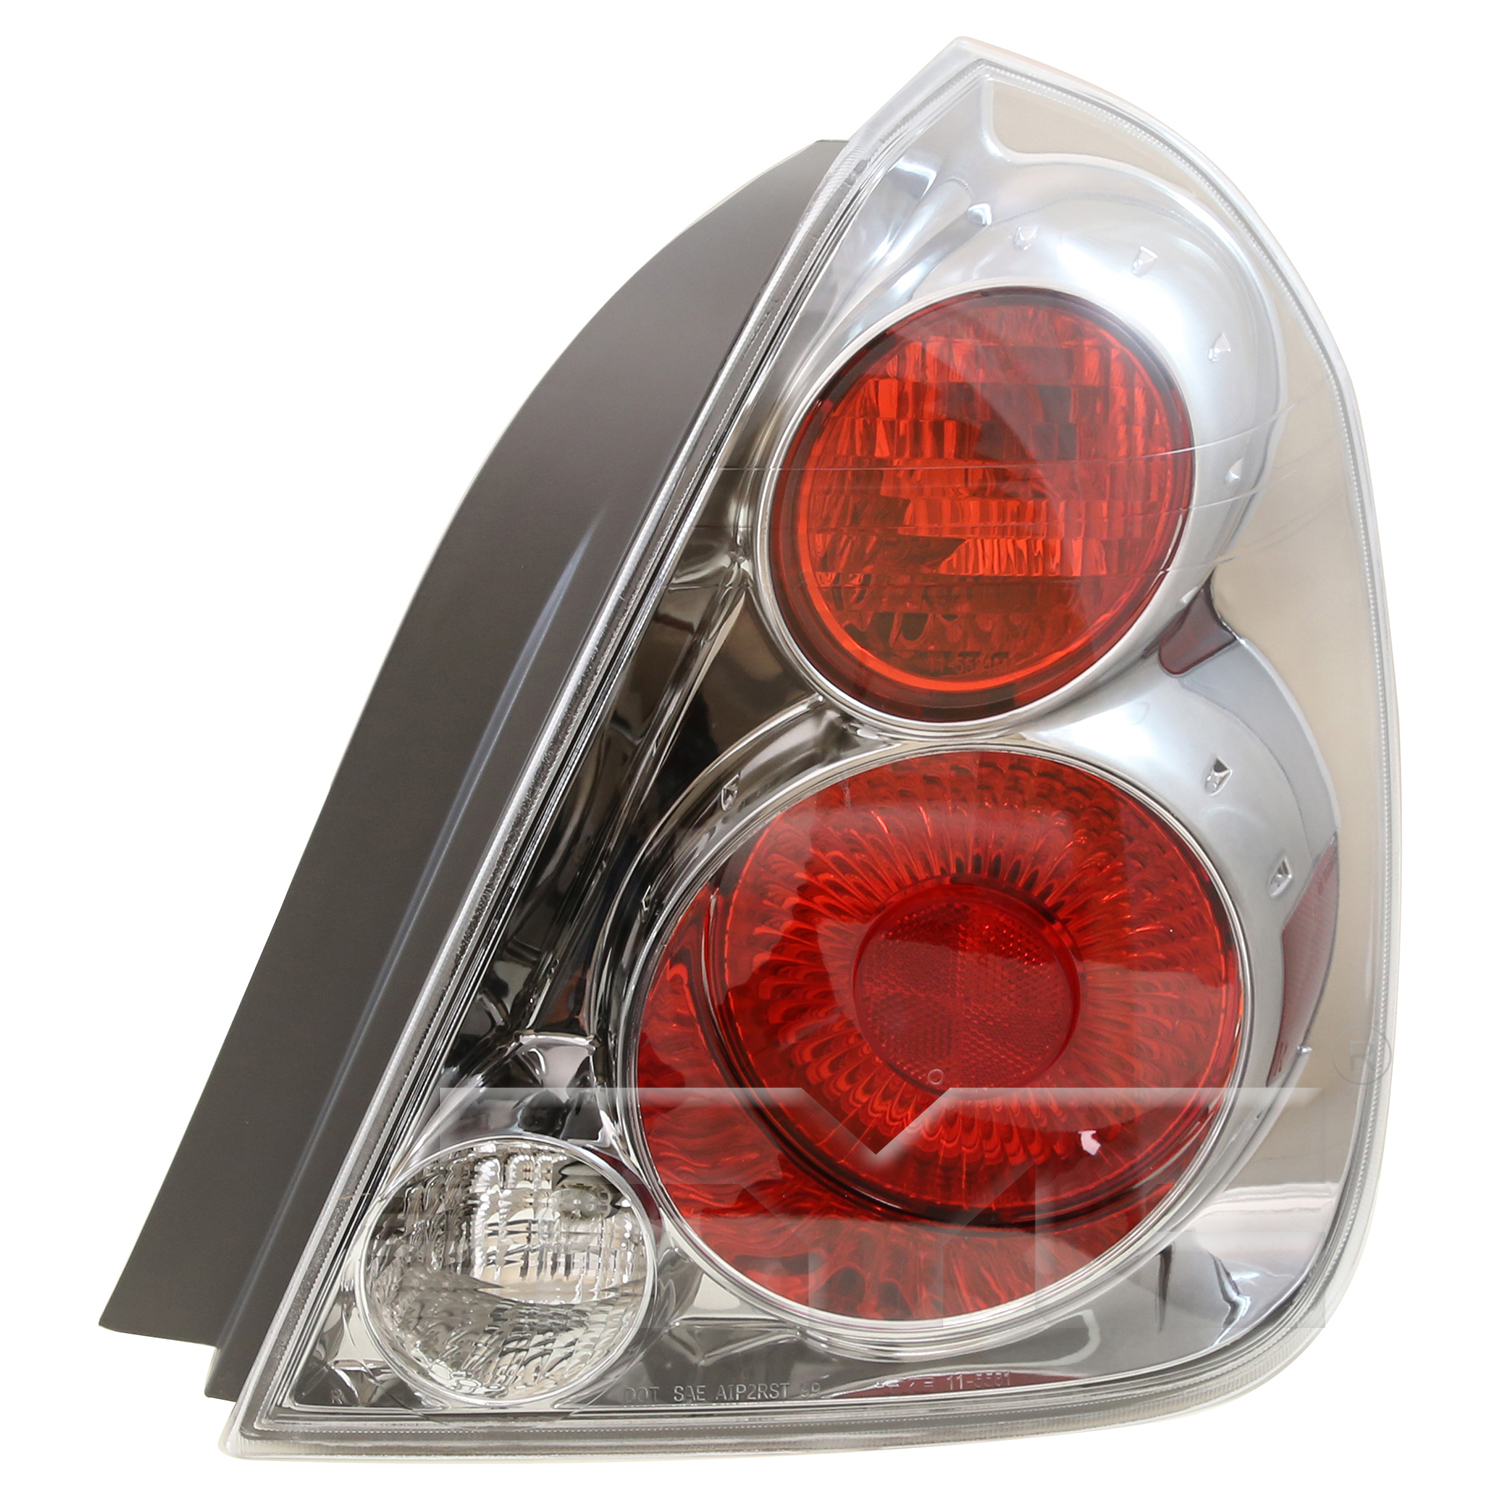 Aftermarket TAILLIGHTS for NISSAN - ALTIMA, ALTIMA,05-06,RT Taillamp assy